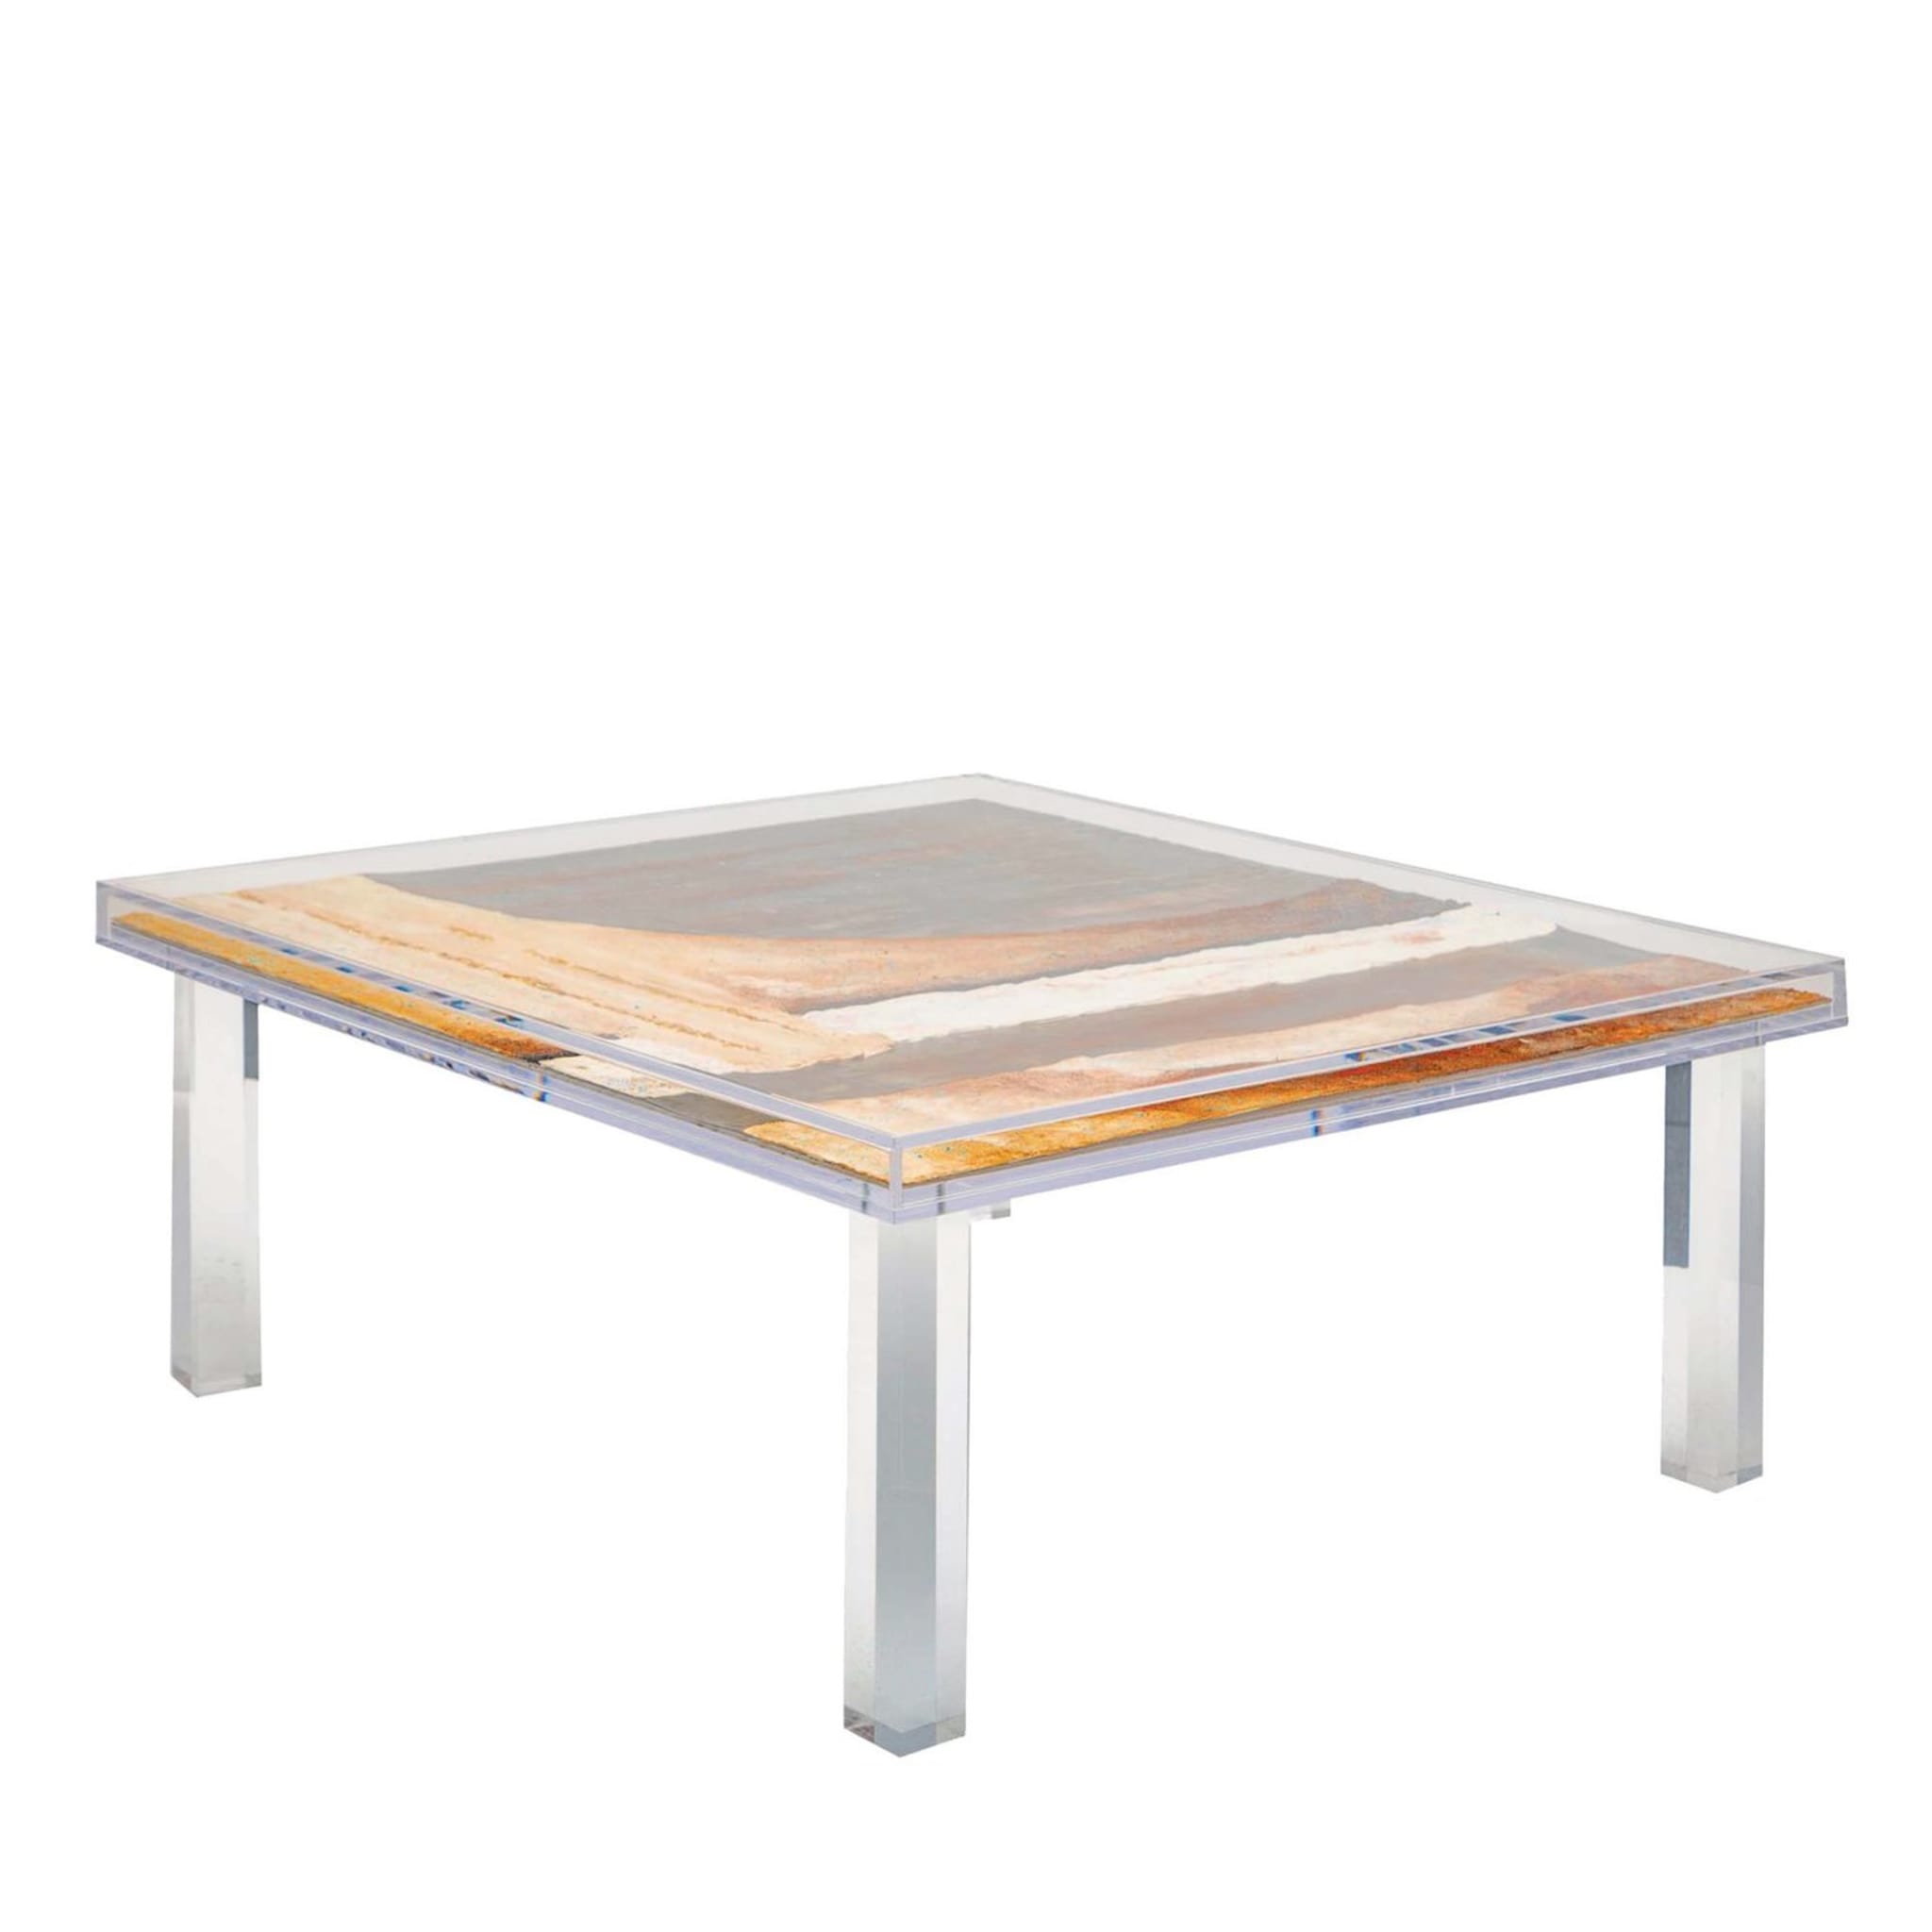 Table basse rectangulaire Abstraction #1 - Vue principale